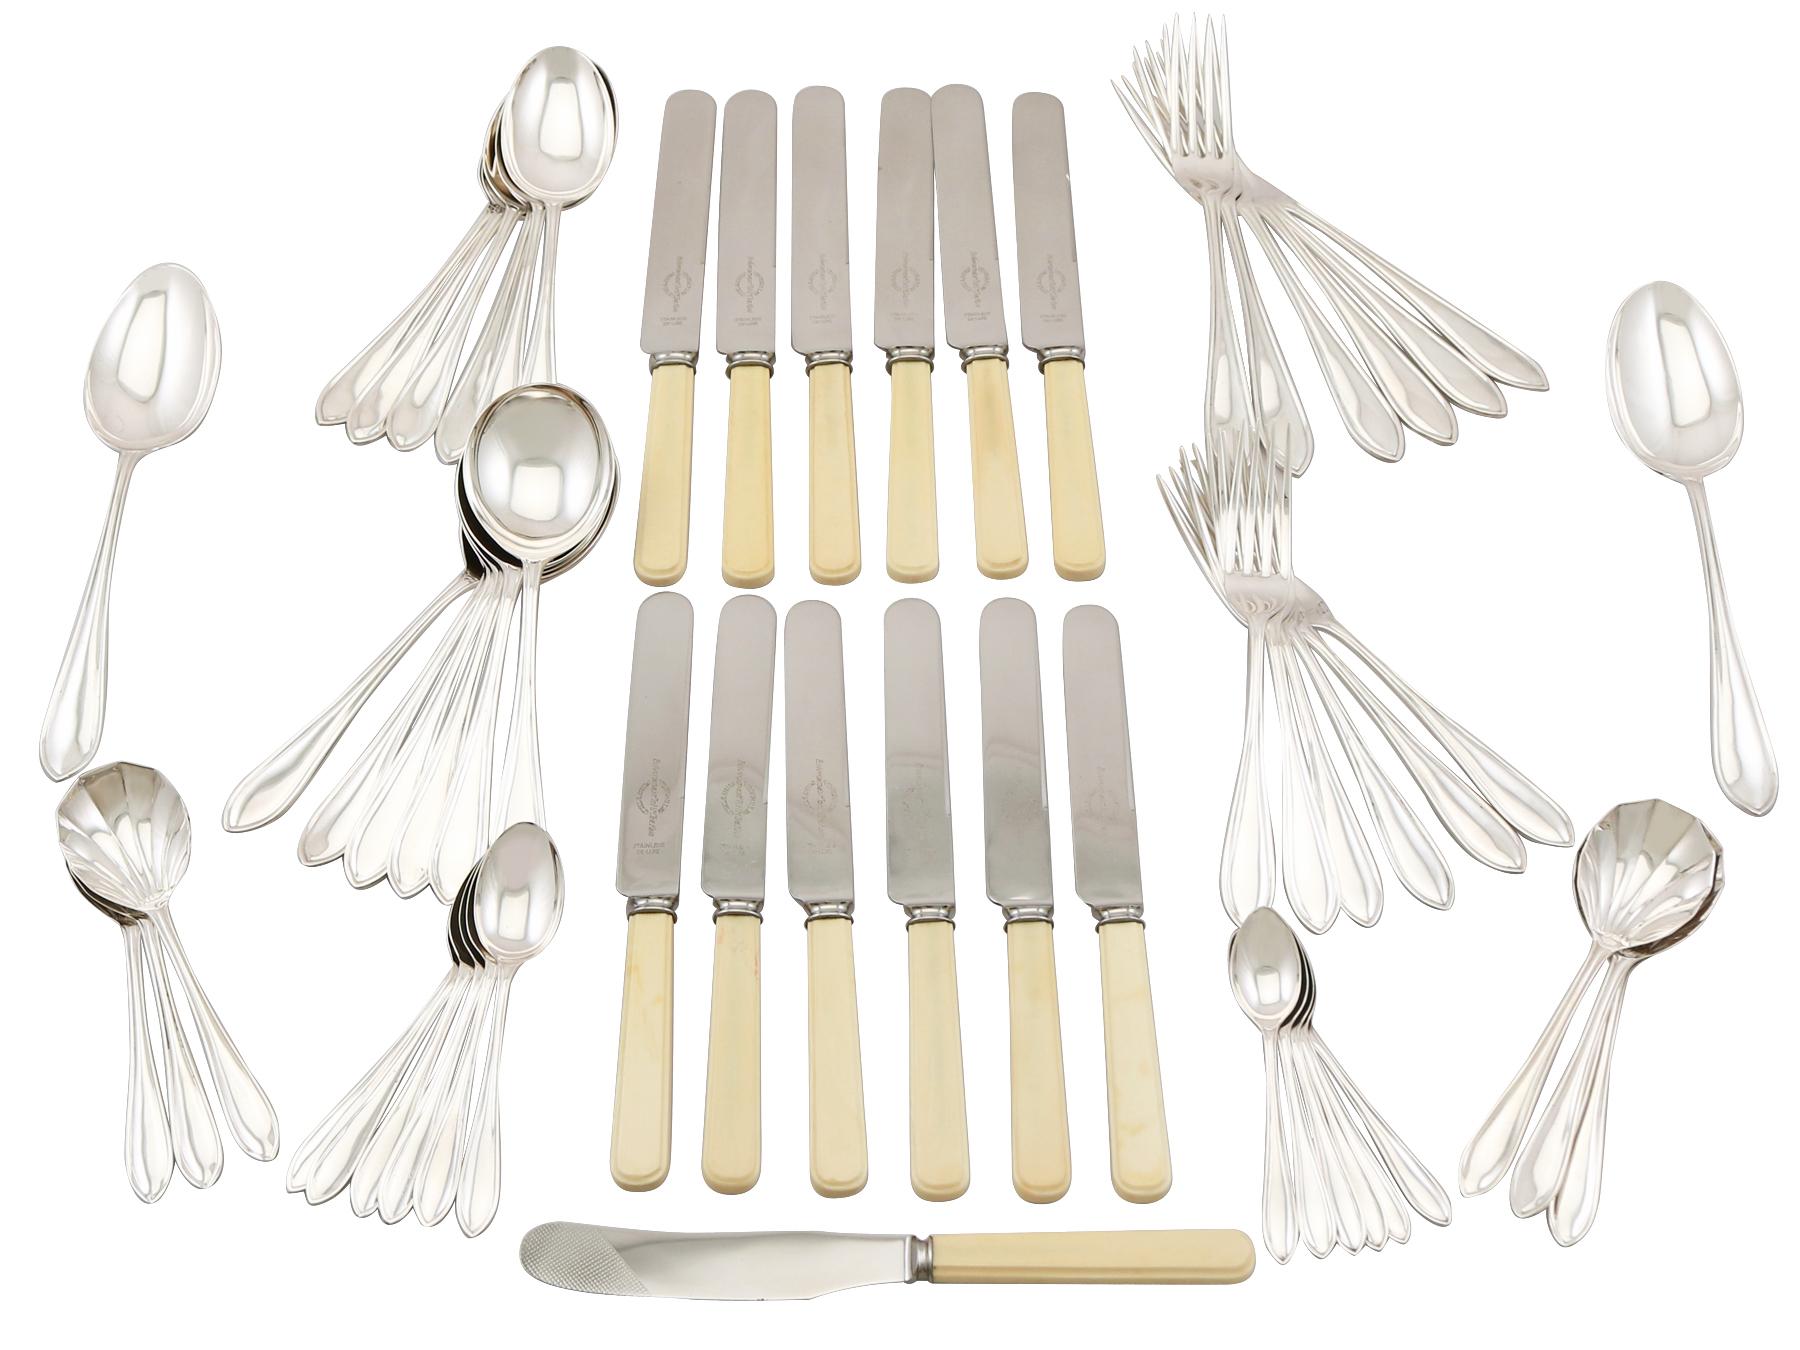 An exceptional, fine and impressive antique Edward VIII English straight sterling silver Sandringham pattern flatware service for six persons; an addition to our canteen of cutlery collection.

The pieces of this exceptional, antique Edward VIII